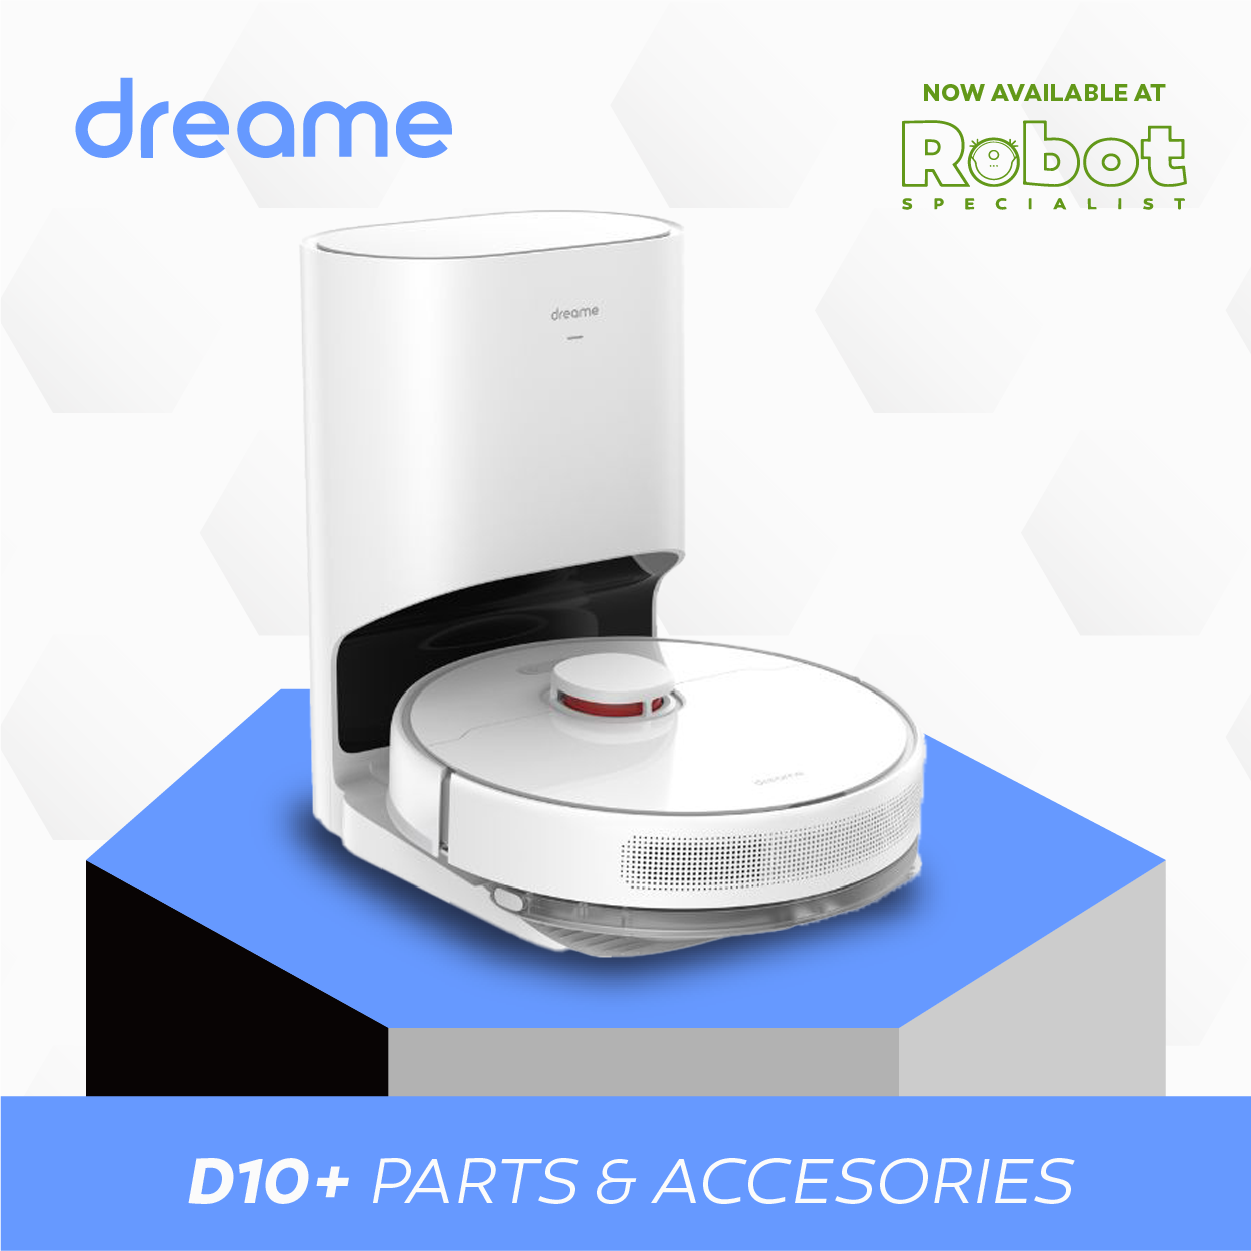 Dreame D10+ Expert Review